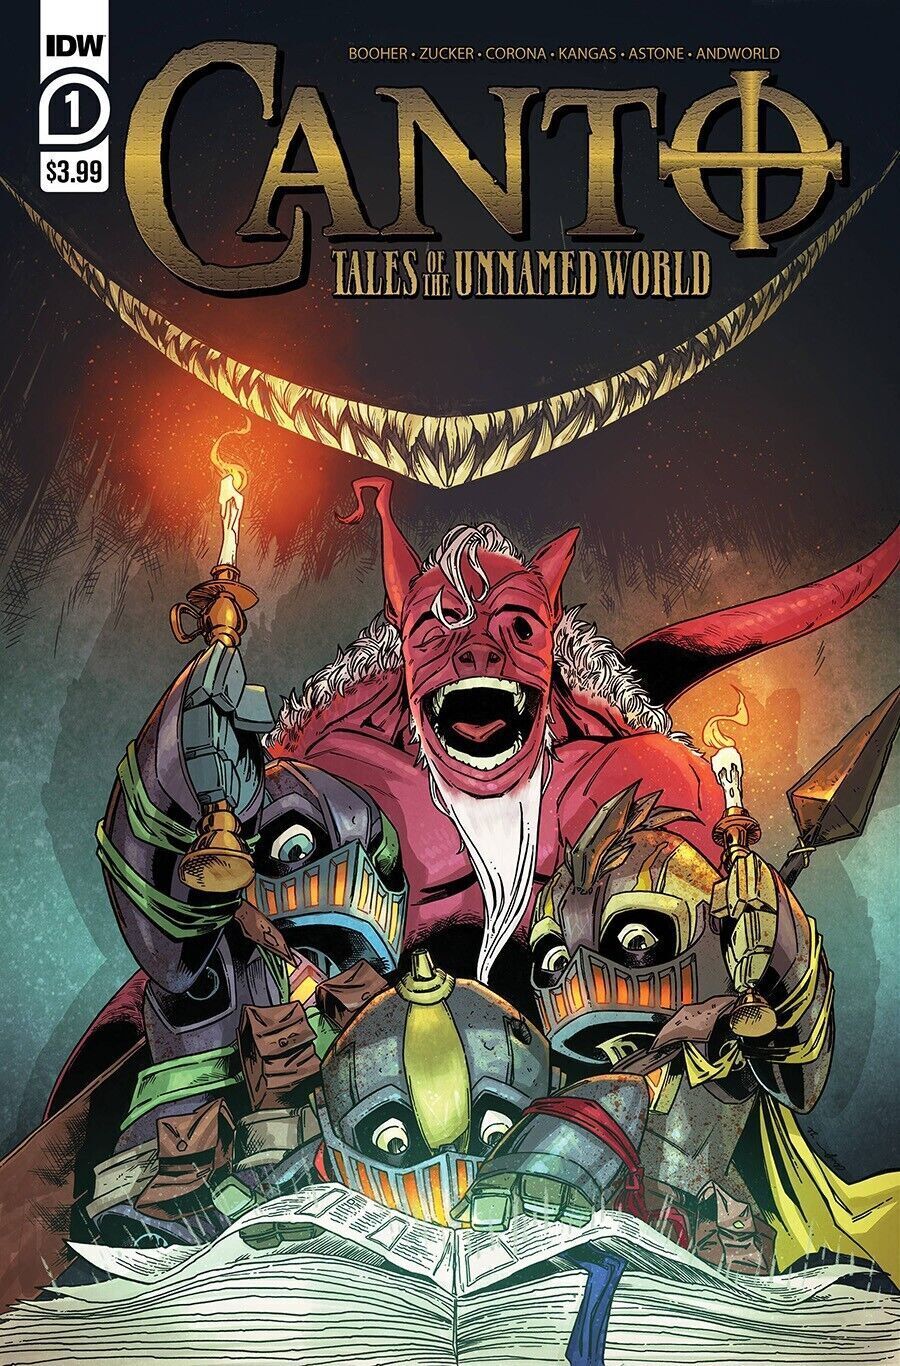 Canto Tales of the Unnamed World #1 2022 Cover A IDW Comic Book